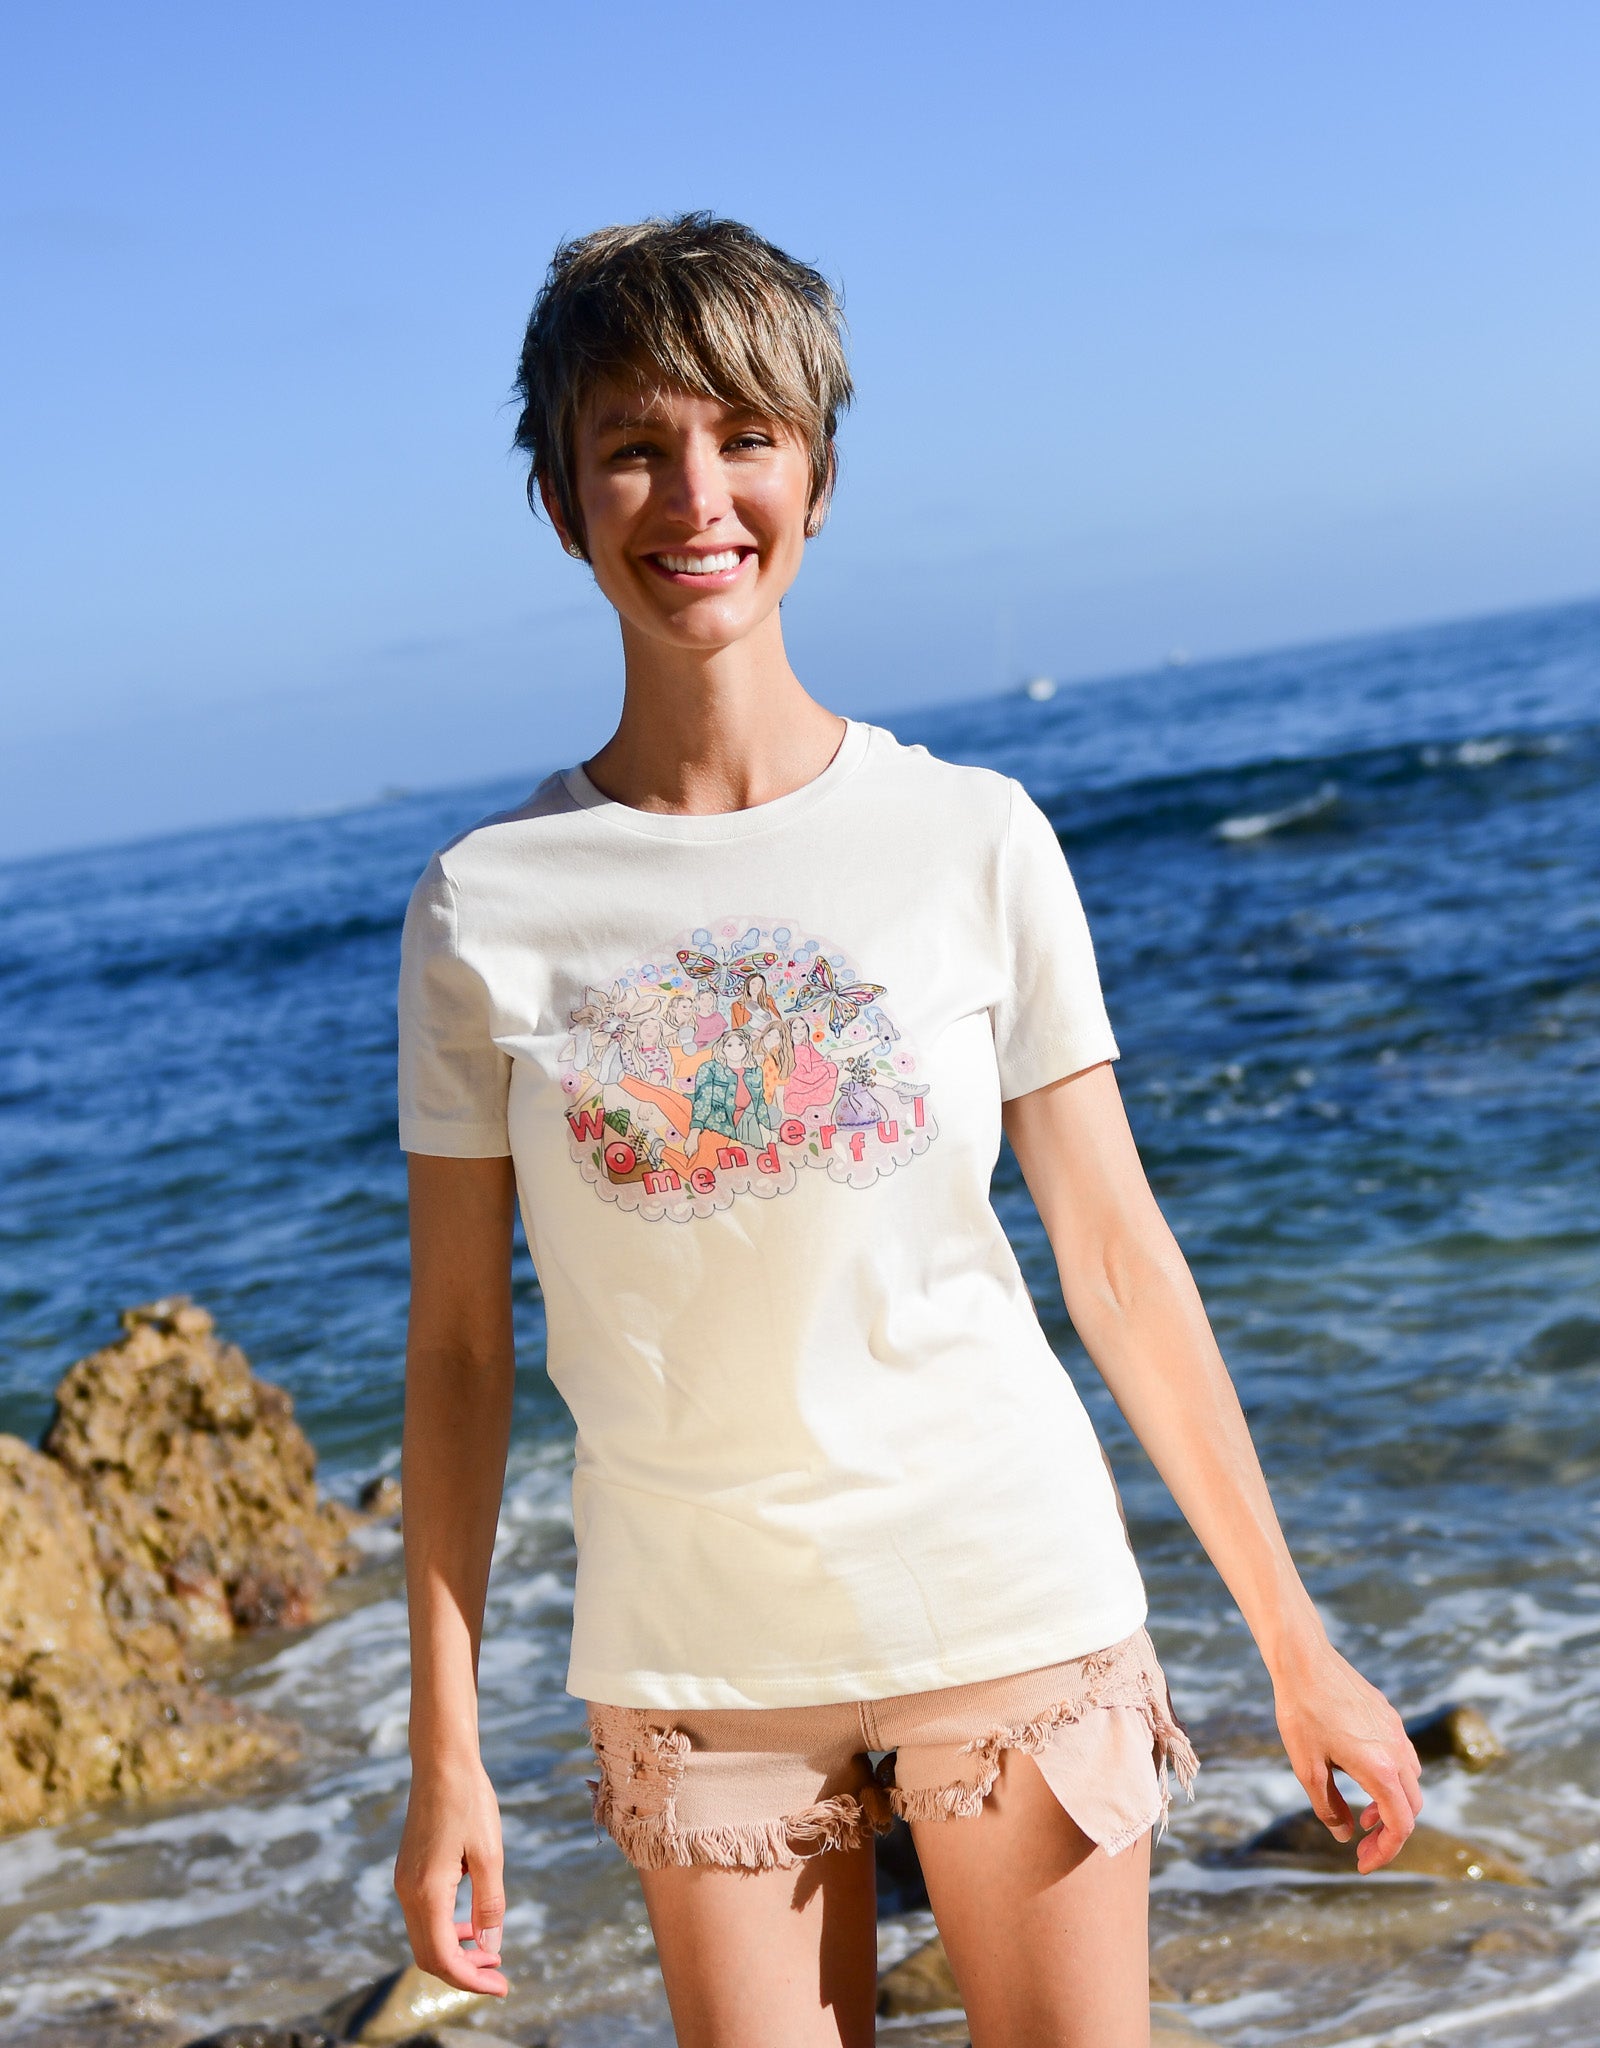 Womenderful women empowering floral graphic tee illustrated and printed by artist in Southern California. 